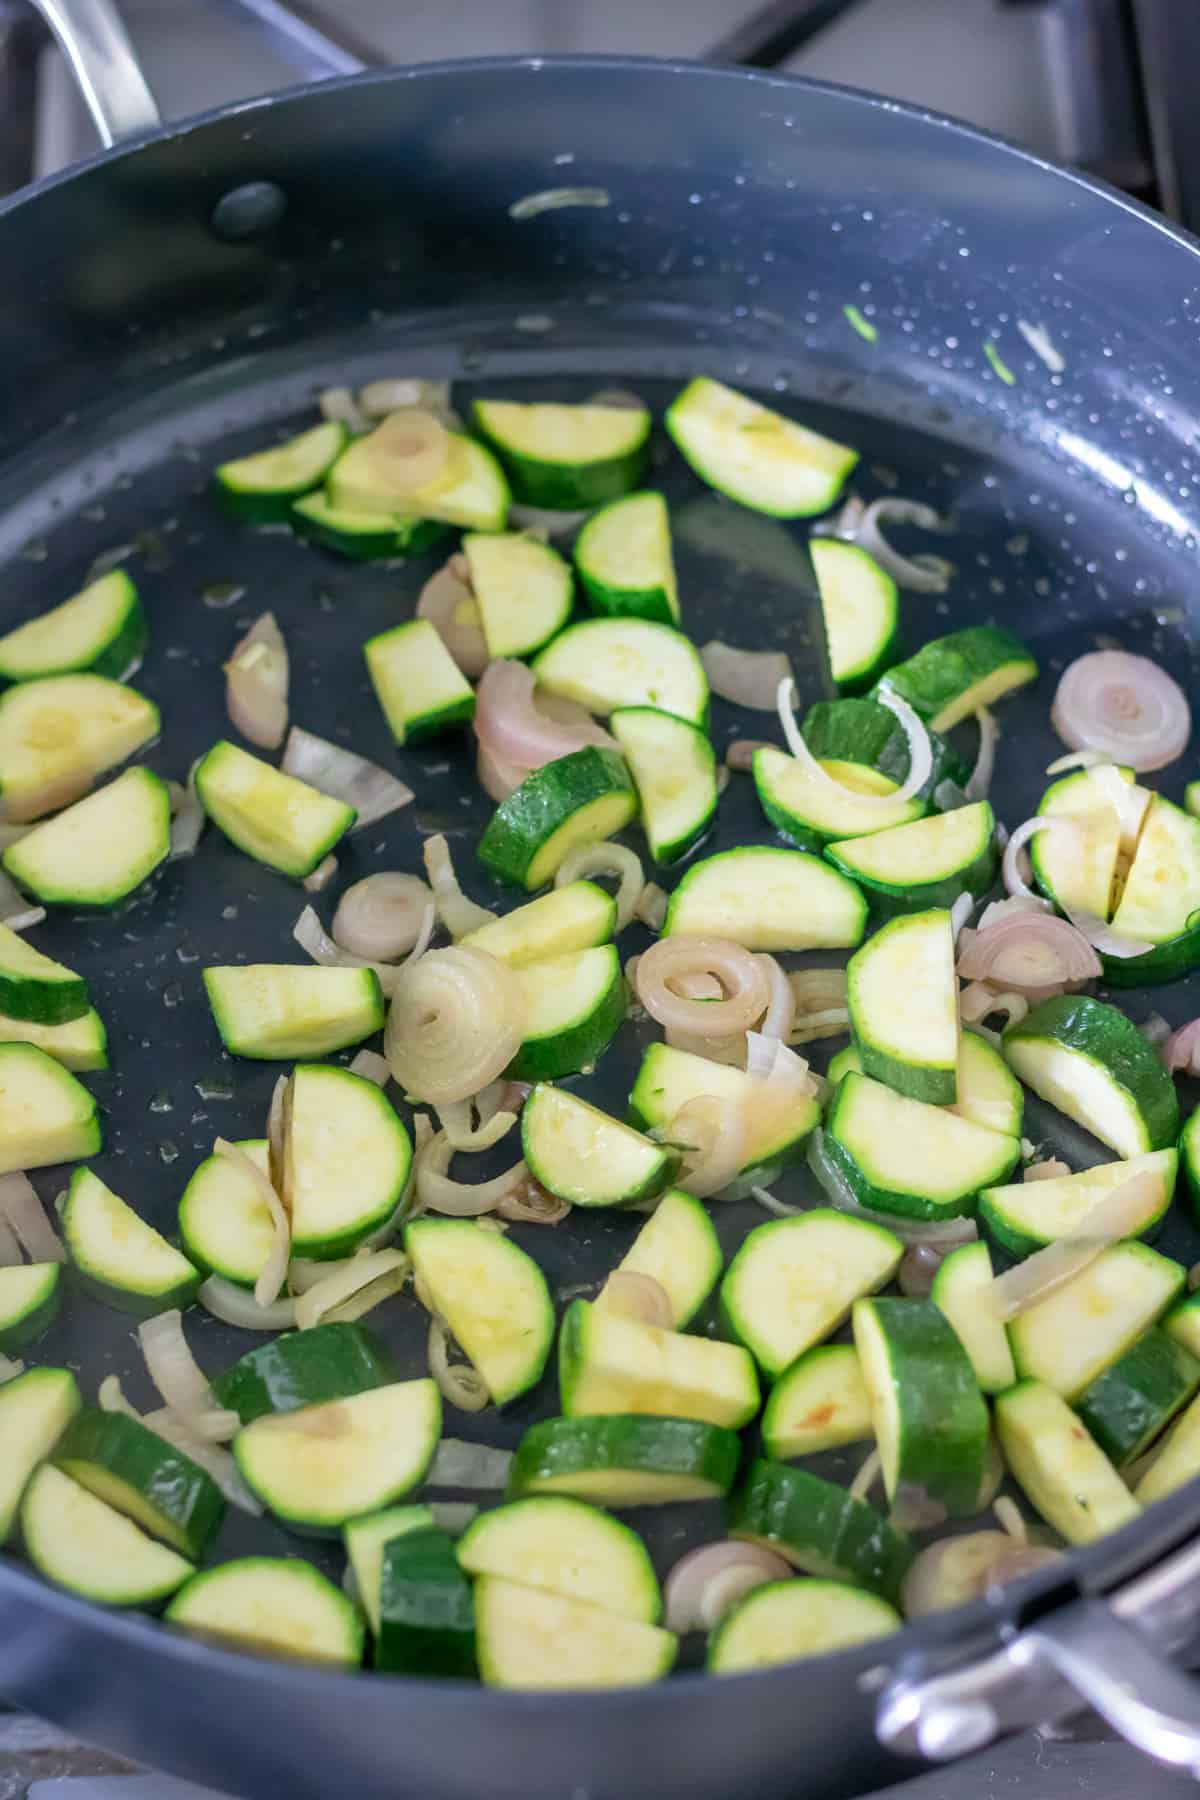 Cooking zucchini and shallots.